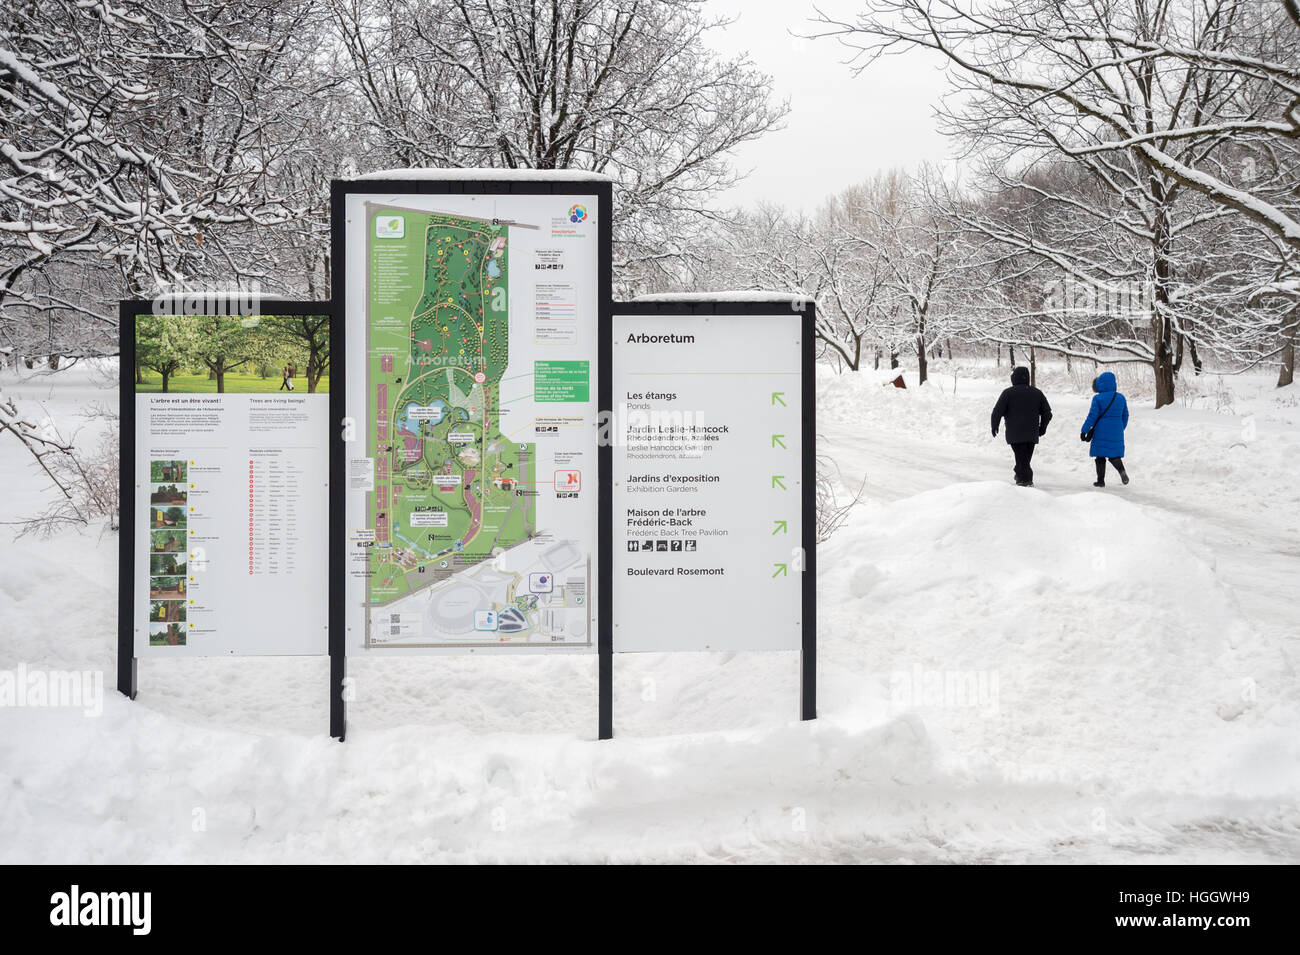 Montreal, CA - 4 January 2017: Snowy landscape and map of the Botanical Garden Stock Photo